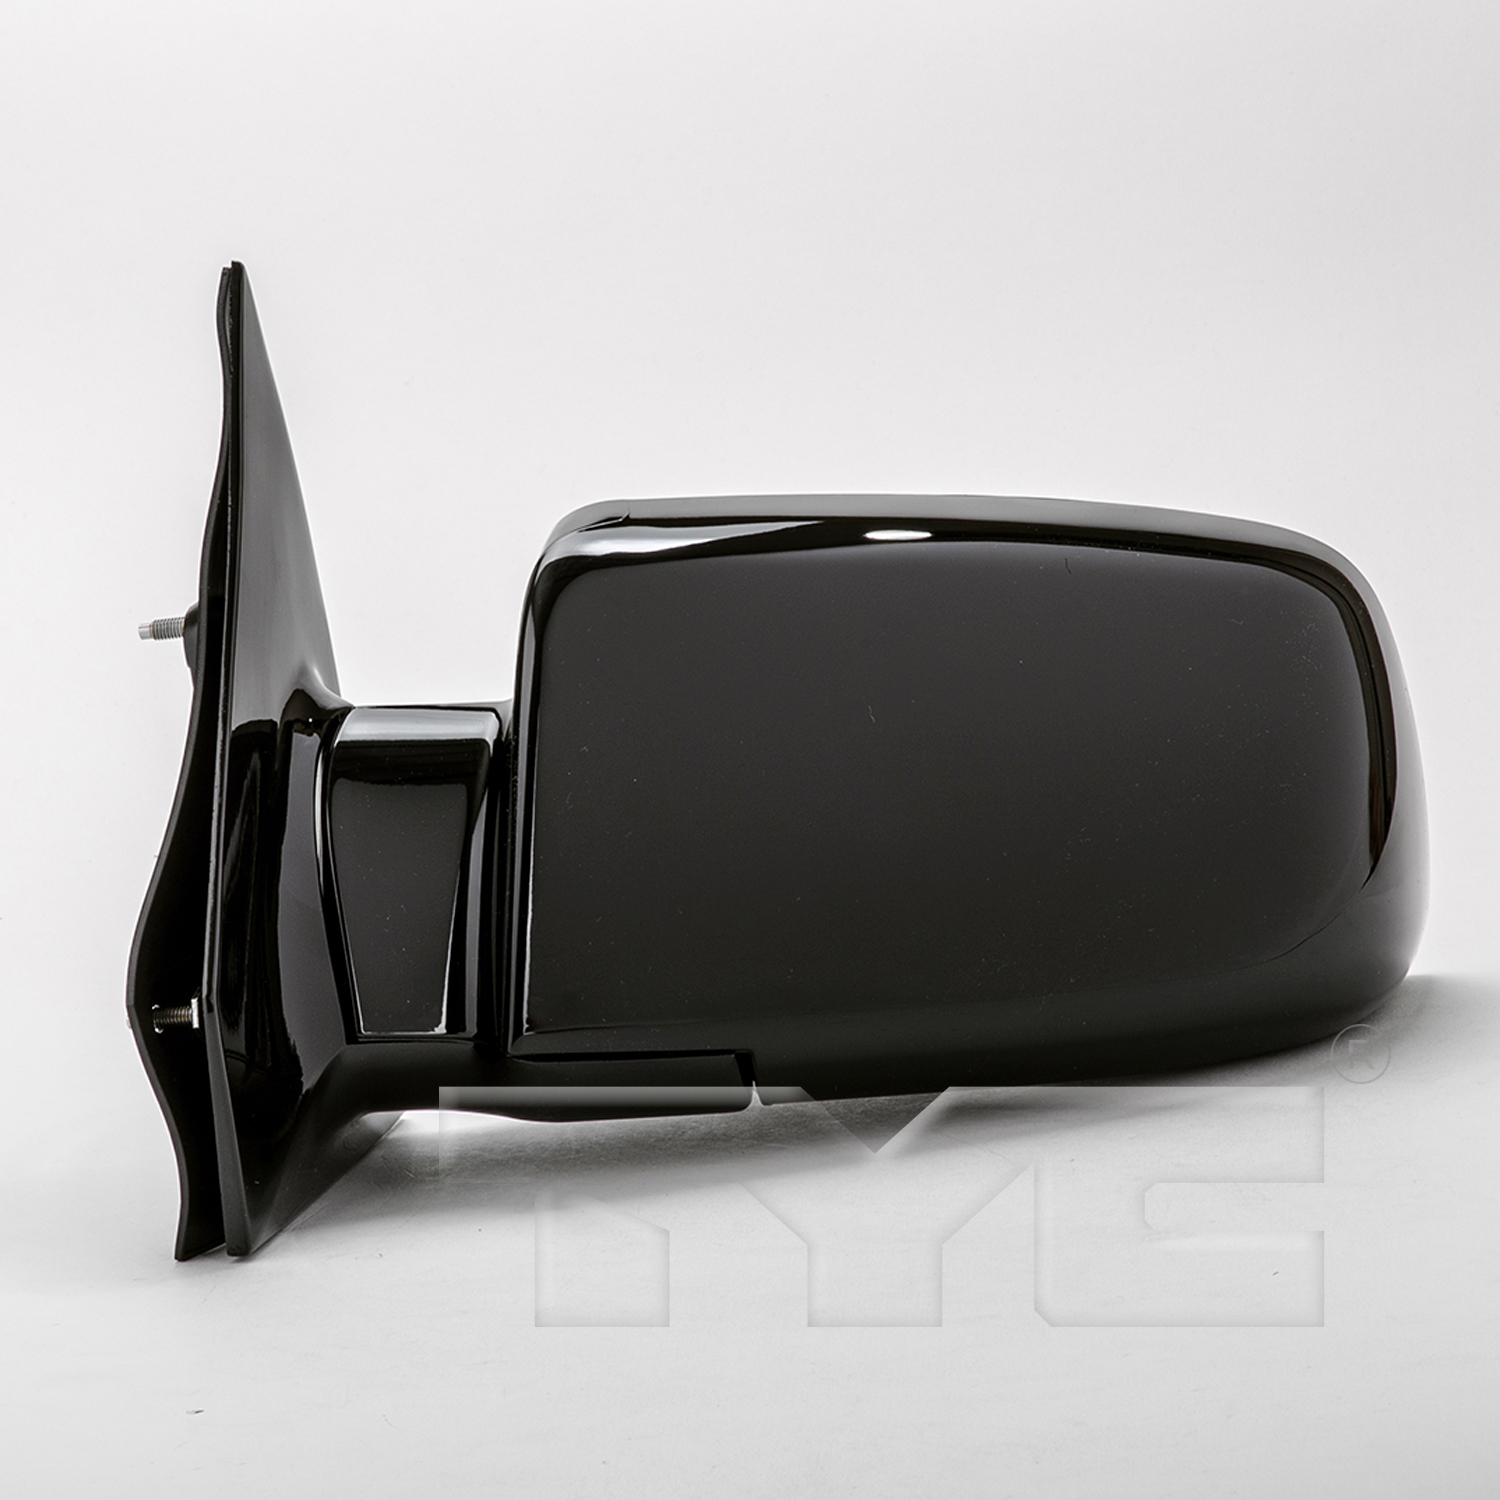 Aftermarket MIRRORS for CHEVROLET - ASTRO, ASTRO,00-05,LT Mirror outside rear view